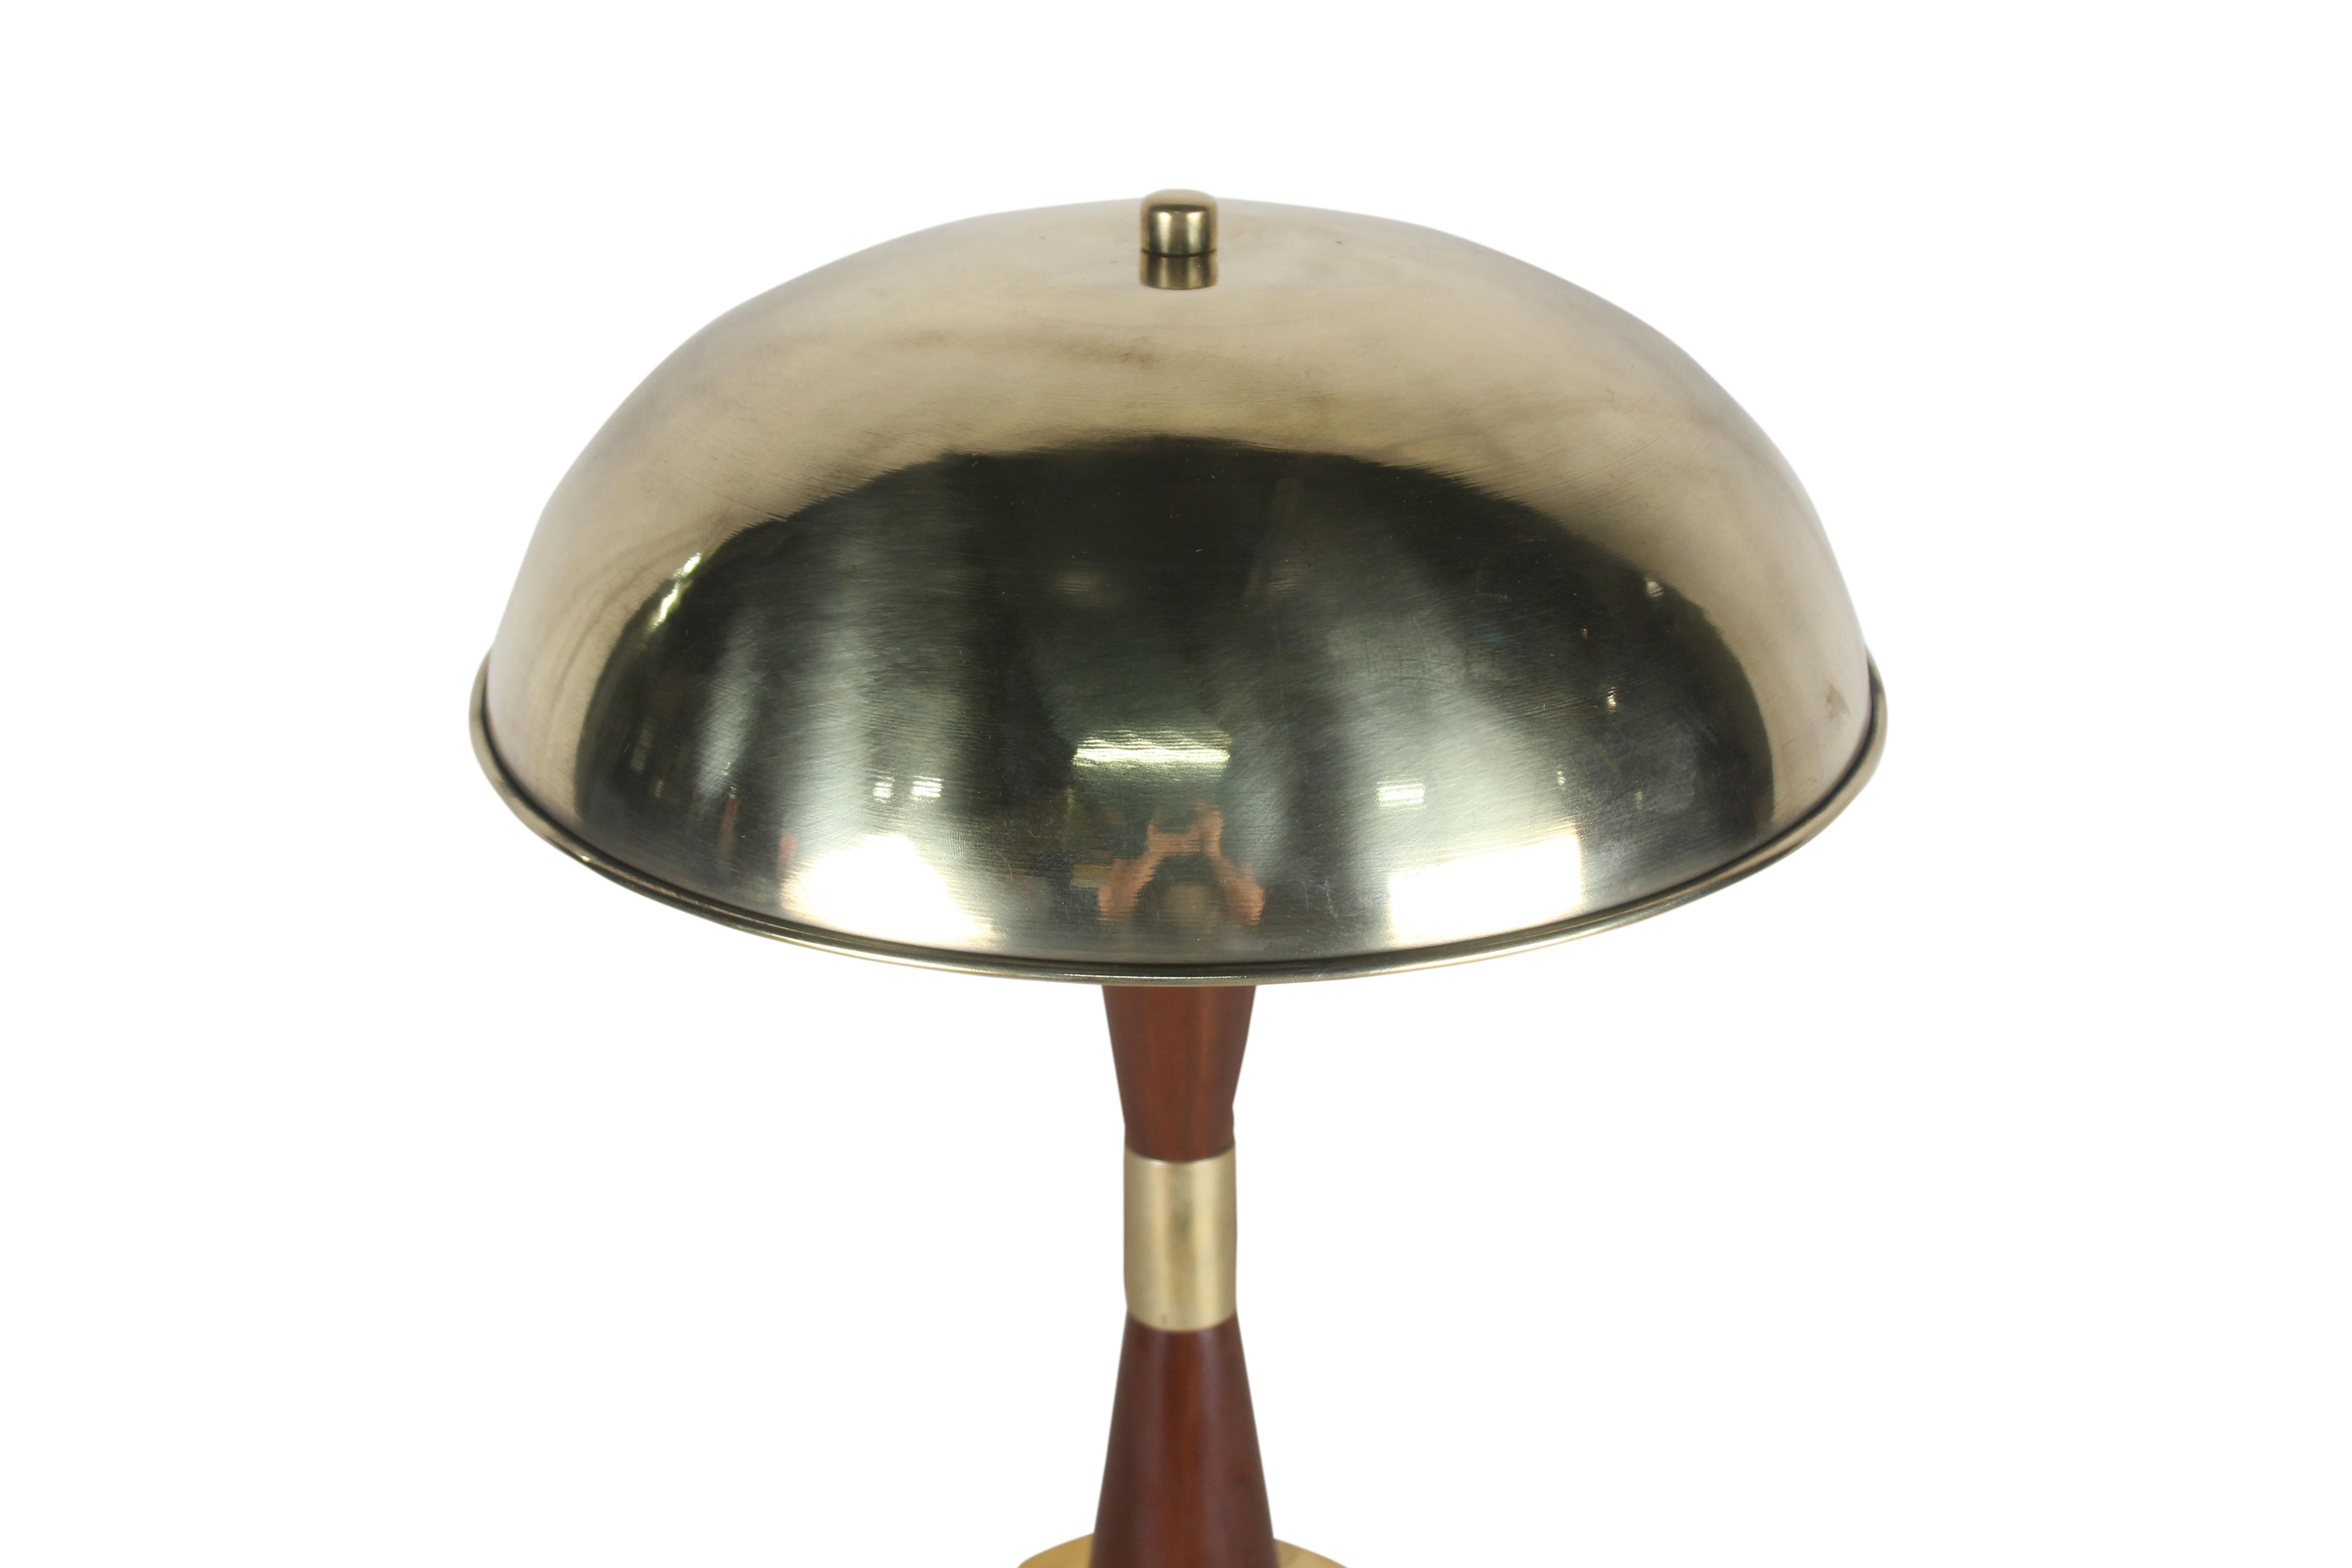 20th Century Pair of Nautical Brass and Teak Table Lamps from Ship's Stateroom